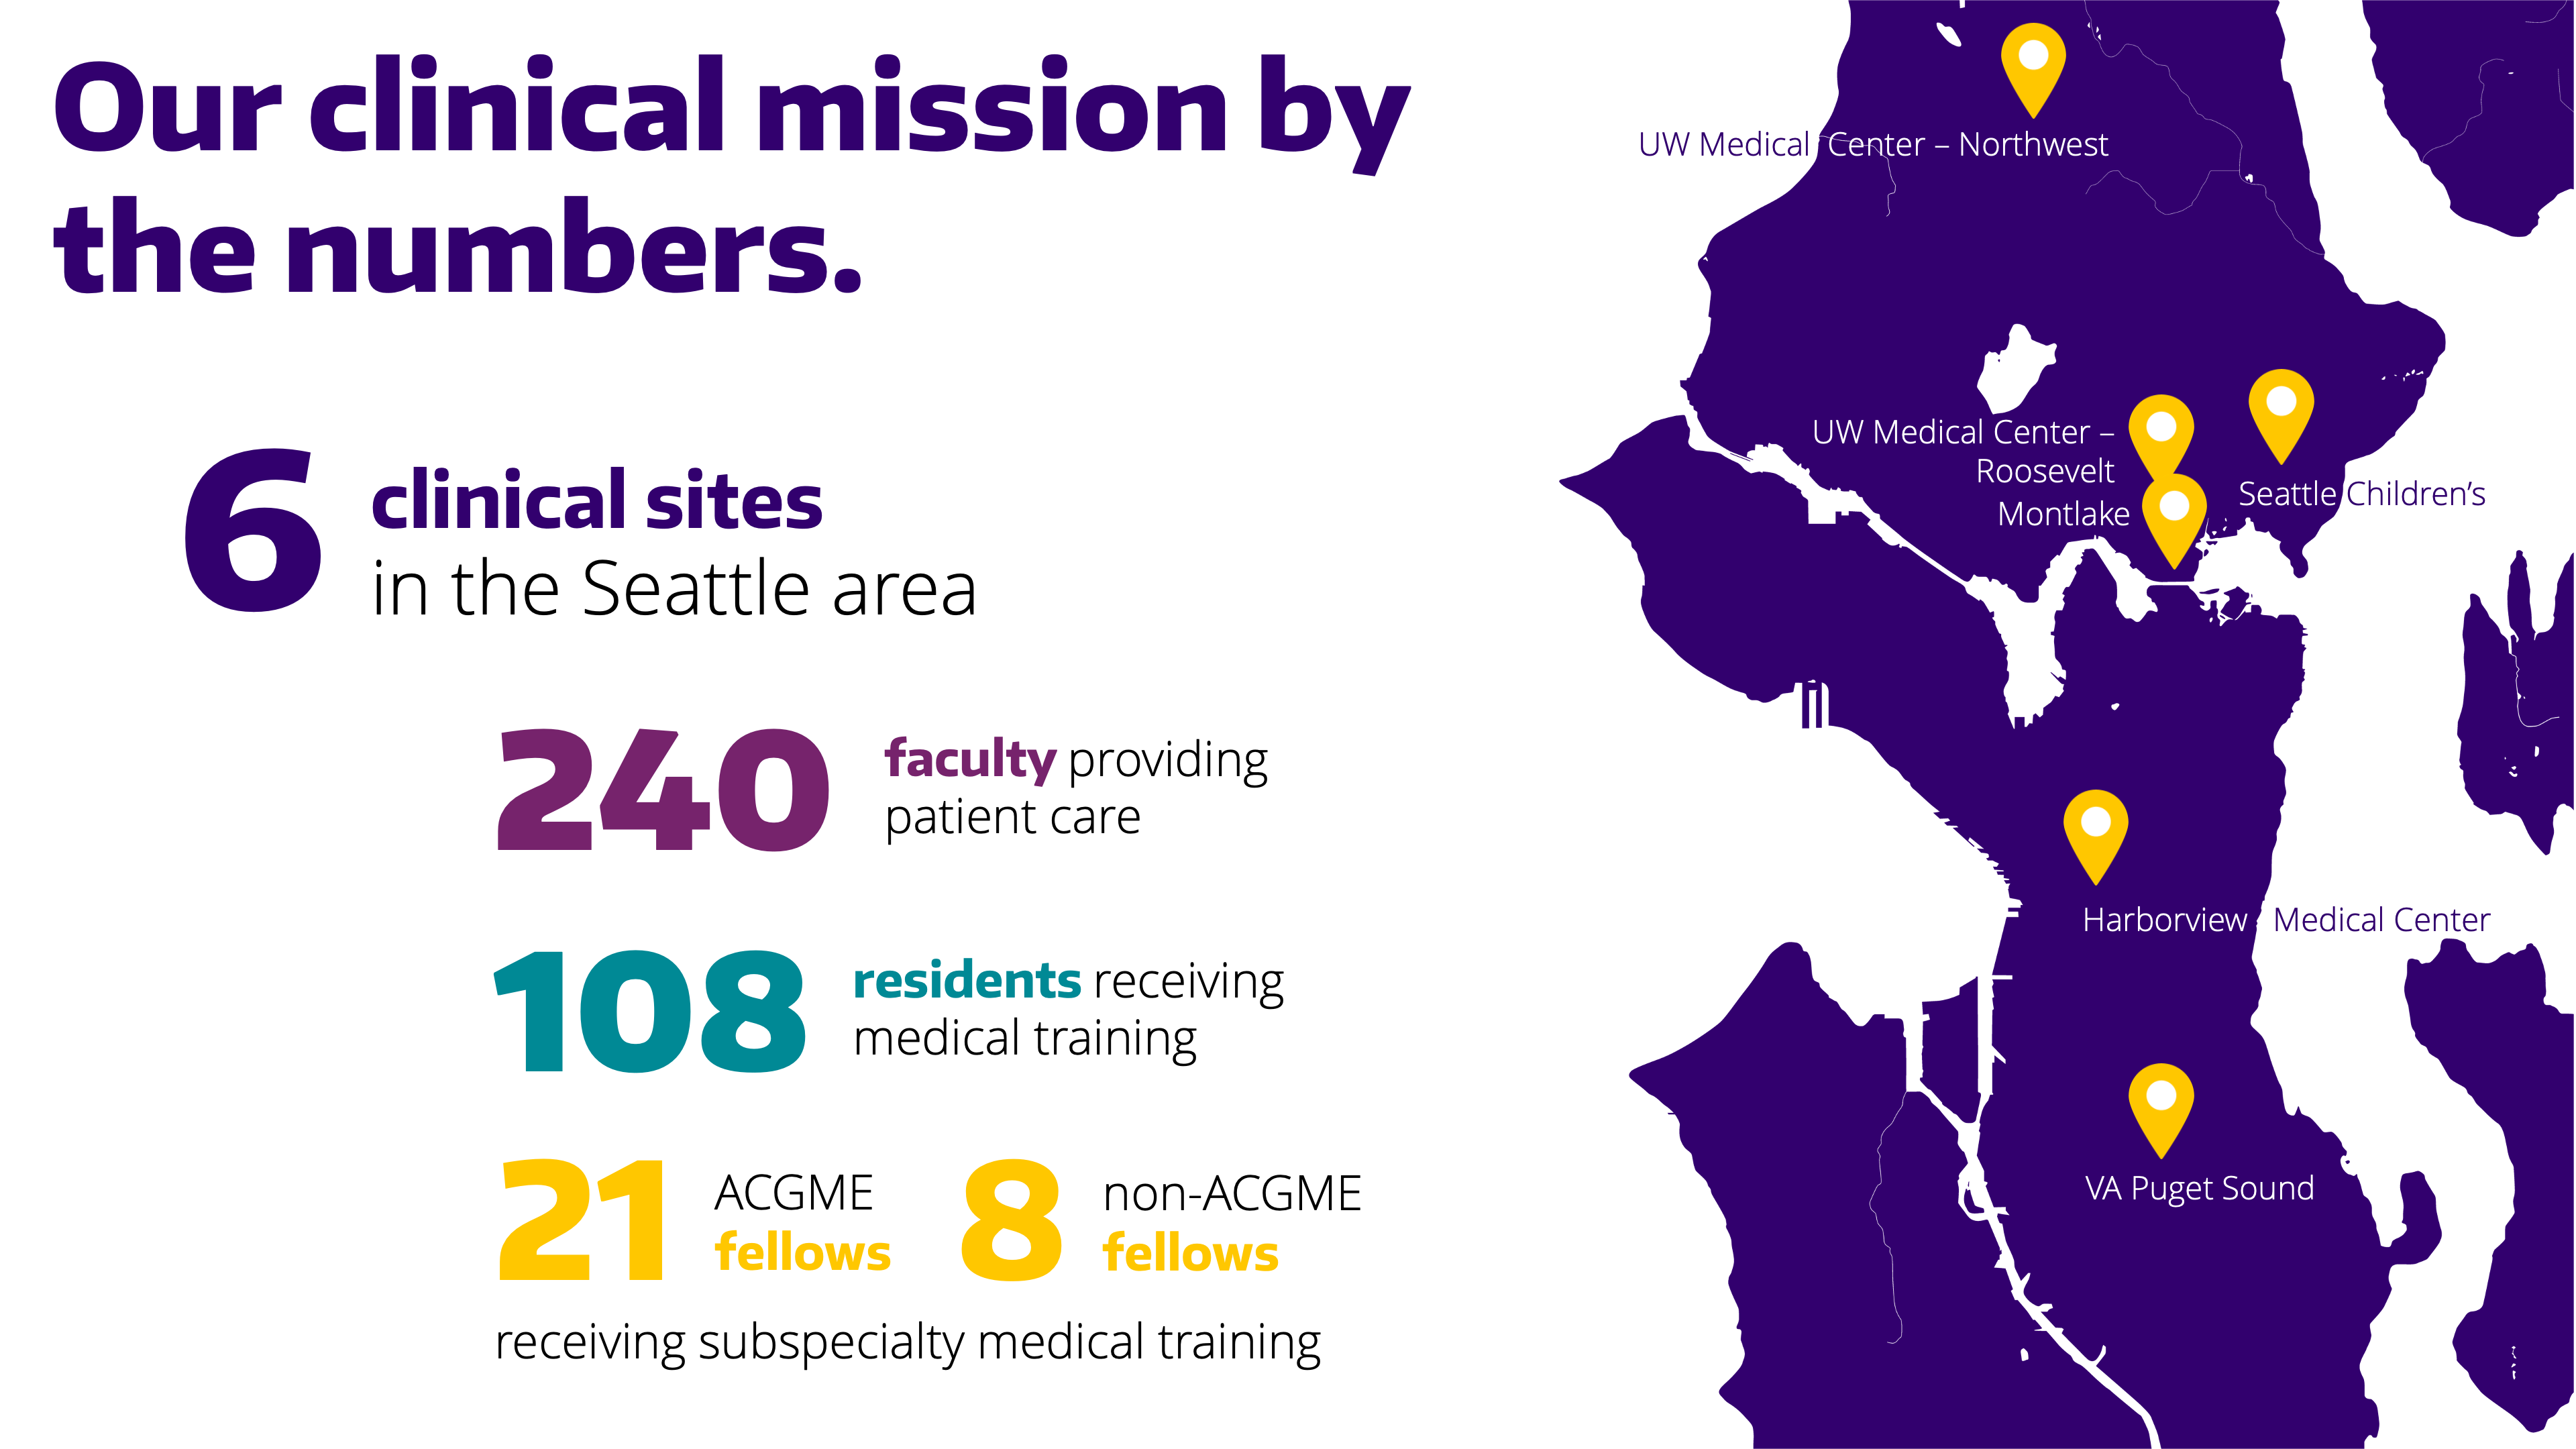 The Department of Anesthesiology and Pain Medicine at the University of Washington provides care in the following clinical sites: UW Medical Center at Montlake, Roosevelt and Northwest, Seattle Children's, Harborview Medical Center and the VA Puget Sound.